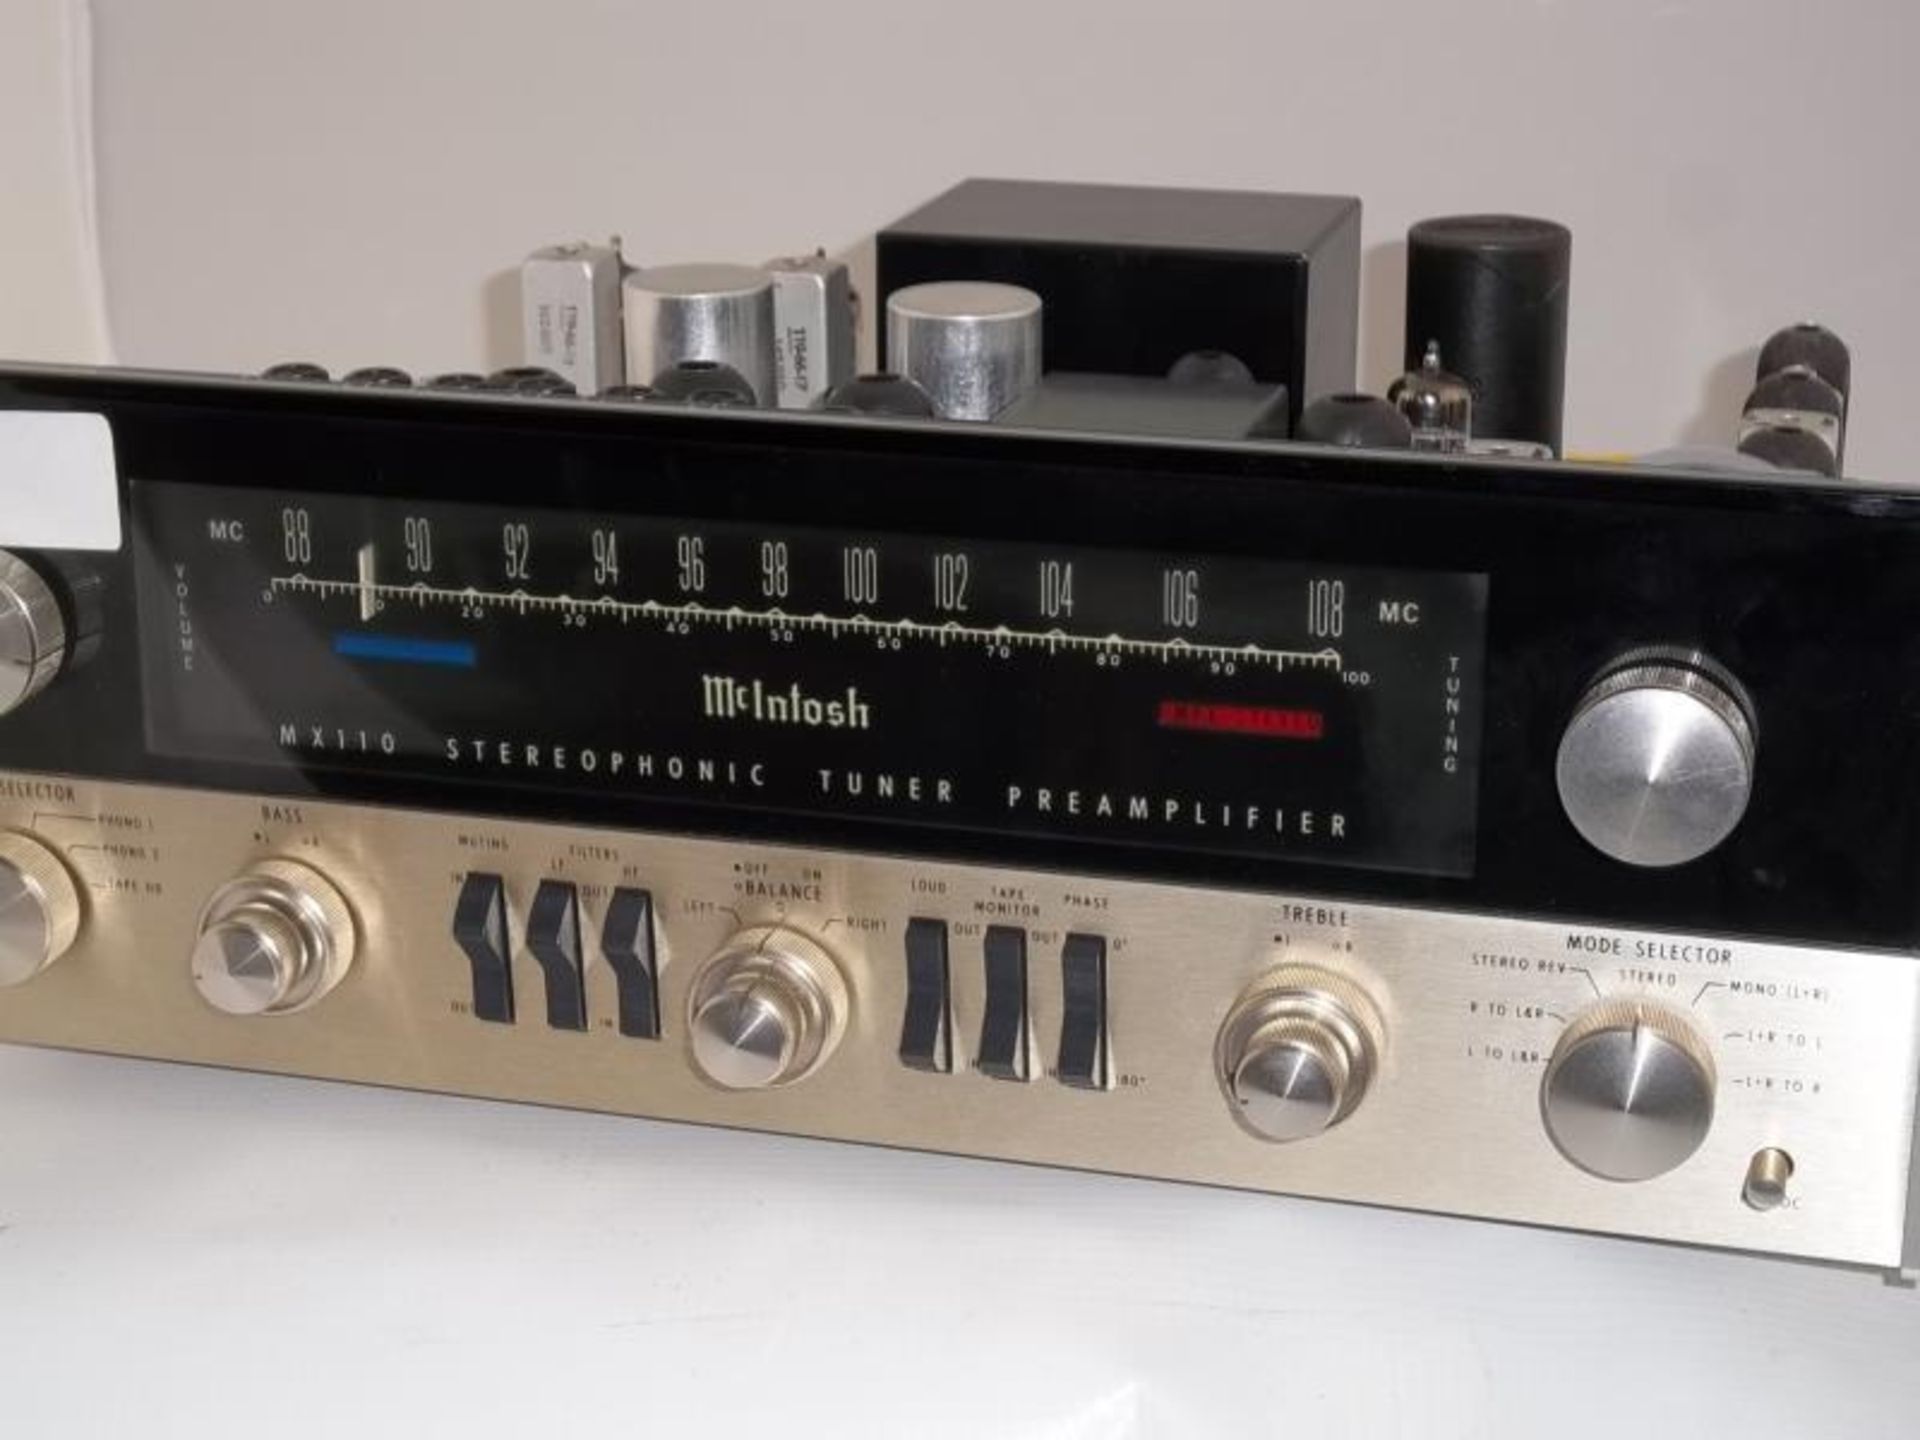 McIntosh MX 110 Stereoptic Tuner Pre Amp, w/case, s # illegible, tested - powers up - Image 2 of 5